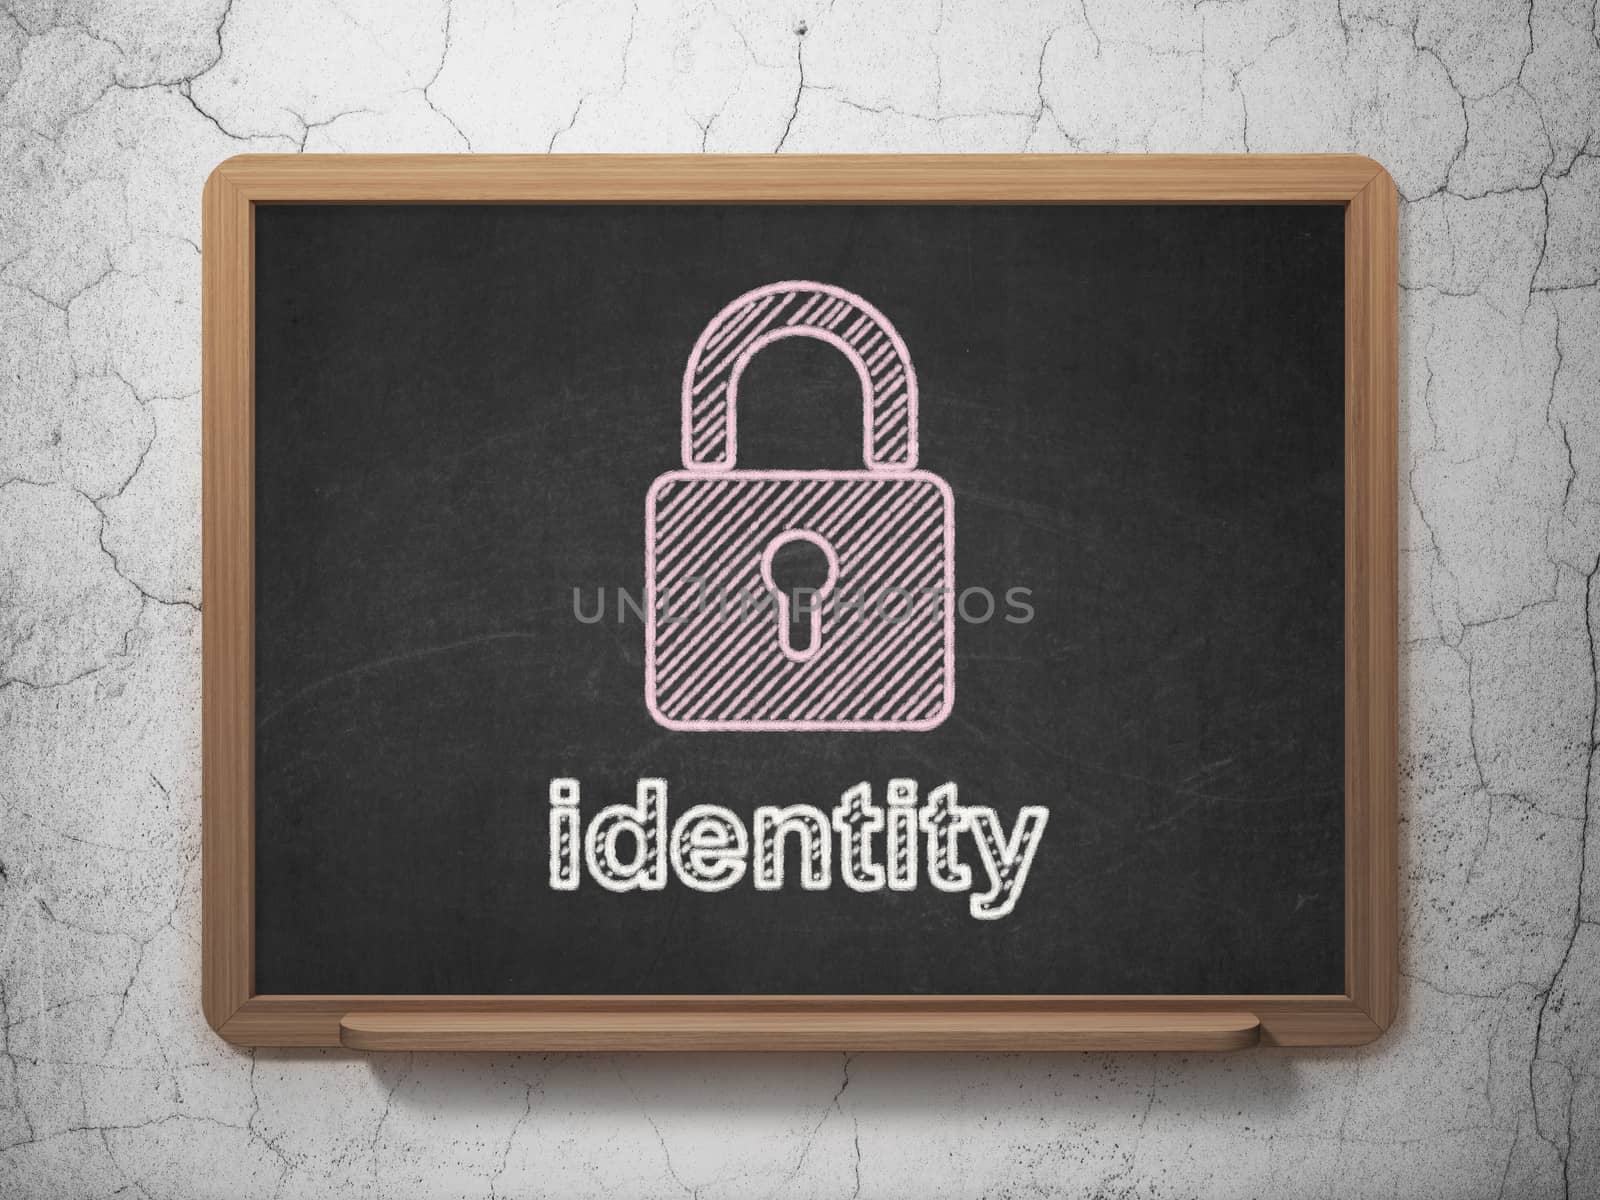 Safety concept: Closed Padlock icon and text Identity on Black chalkboard on grunge wall background, 3d render